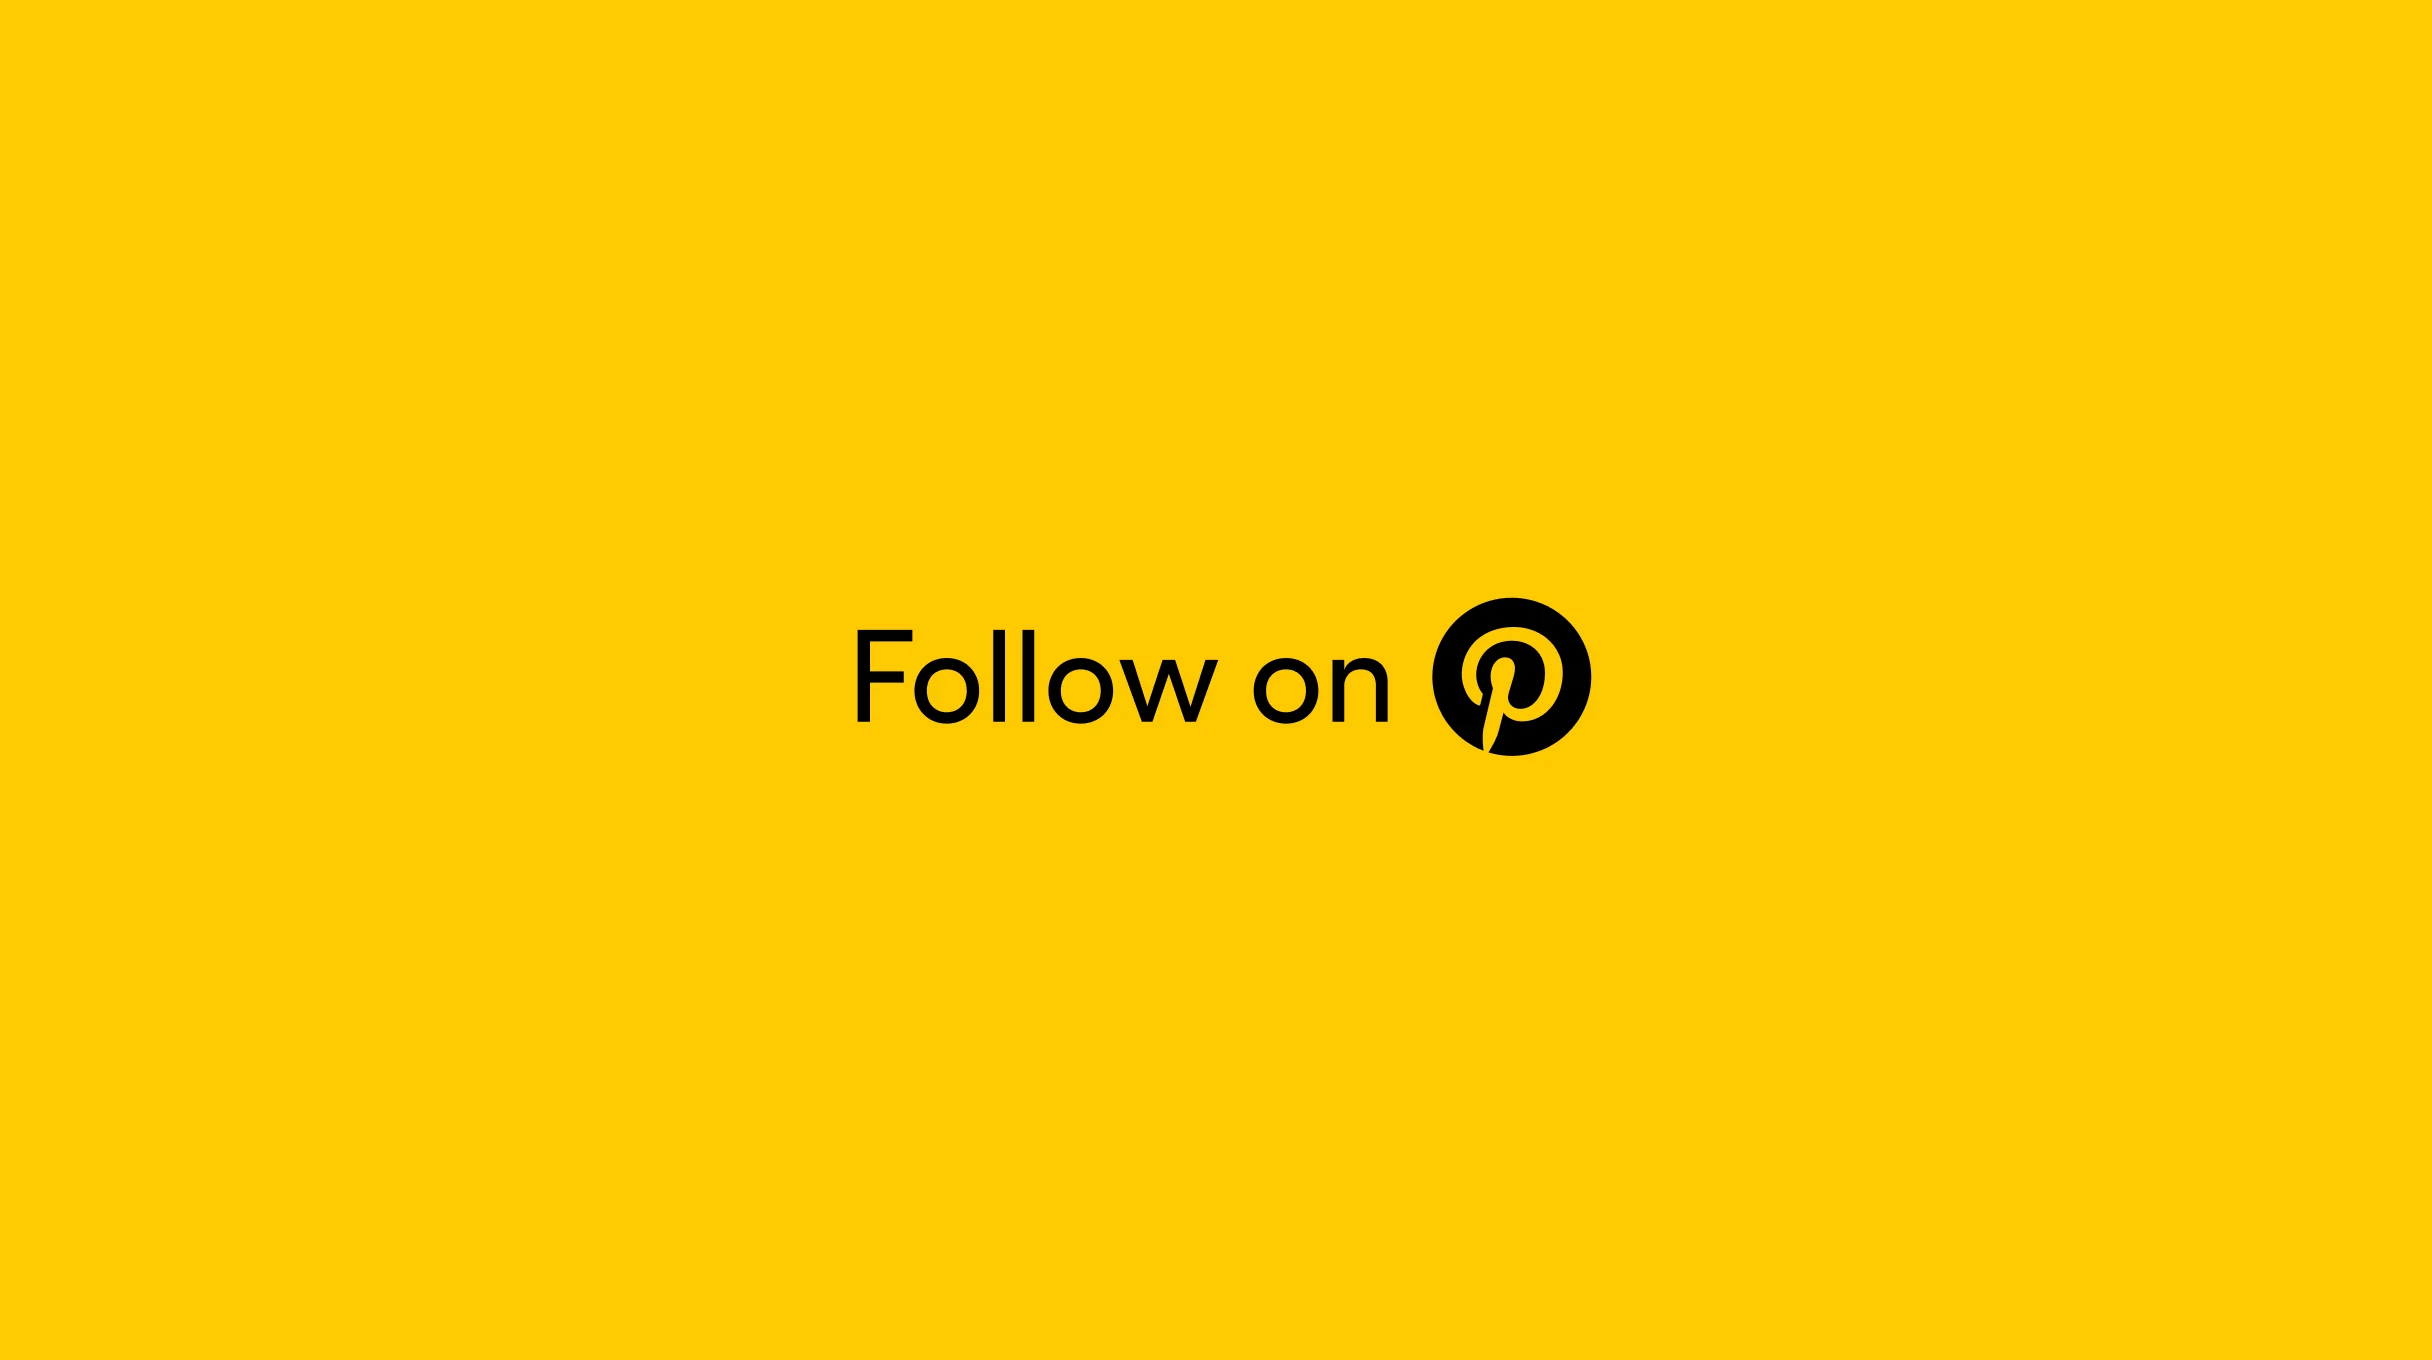 The words "Follow on" and an orange Pinterest logo circled in black against an orange background